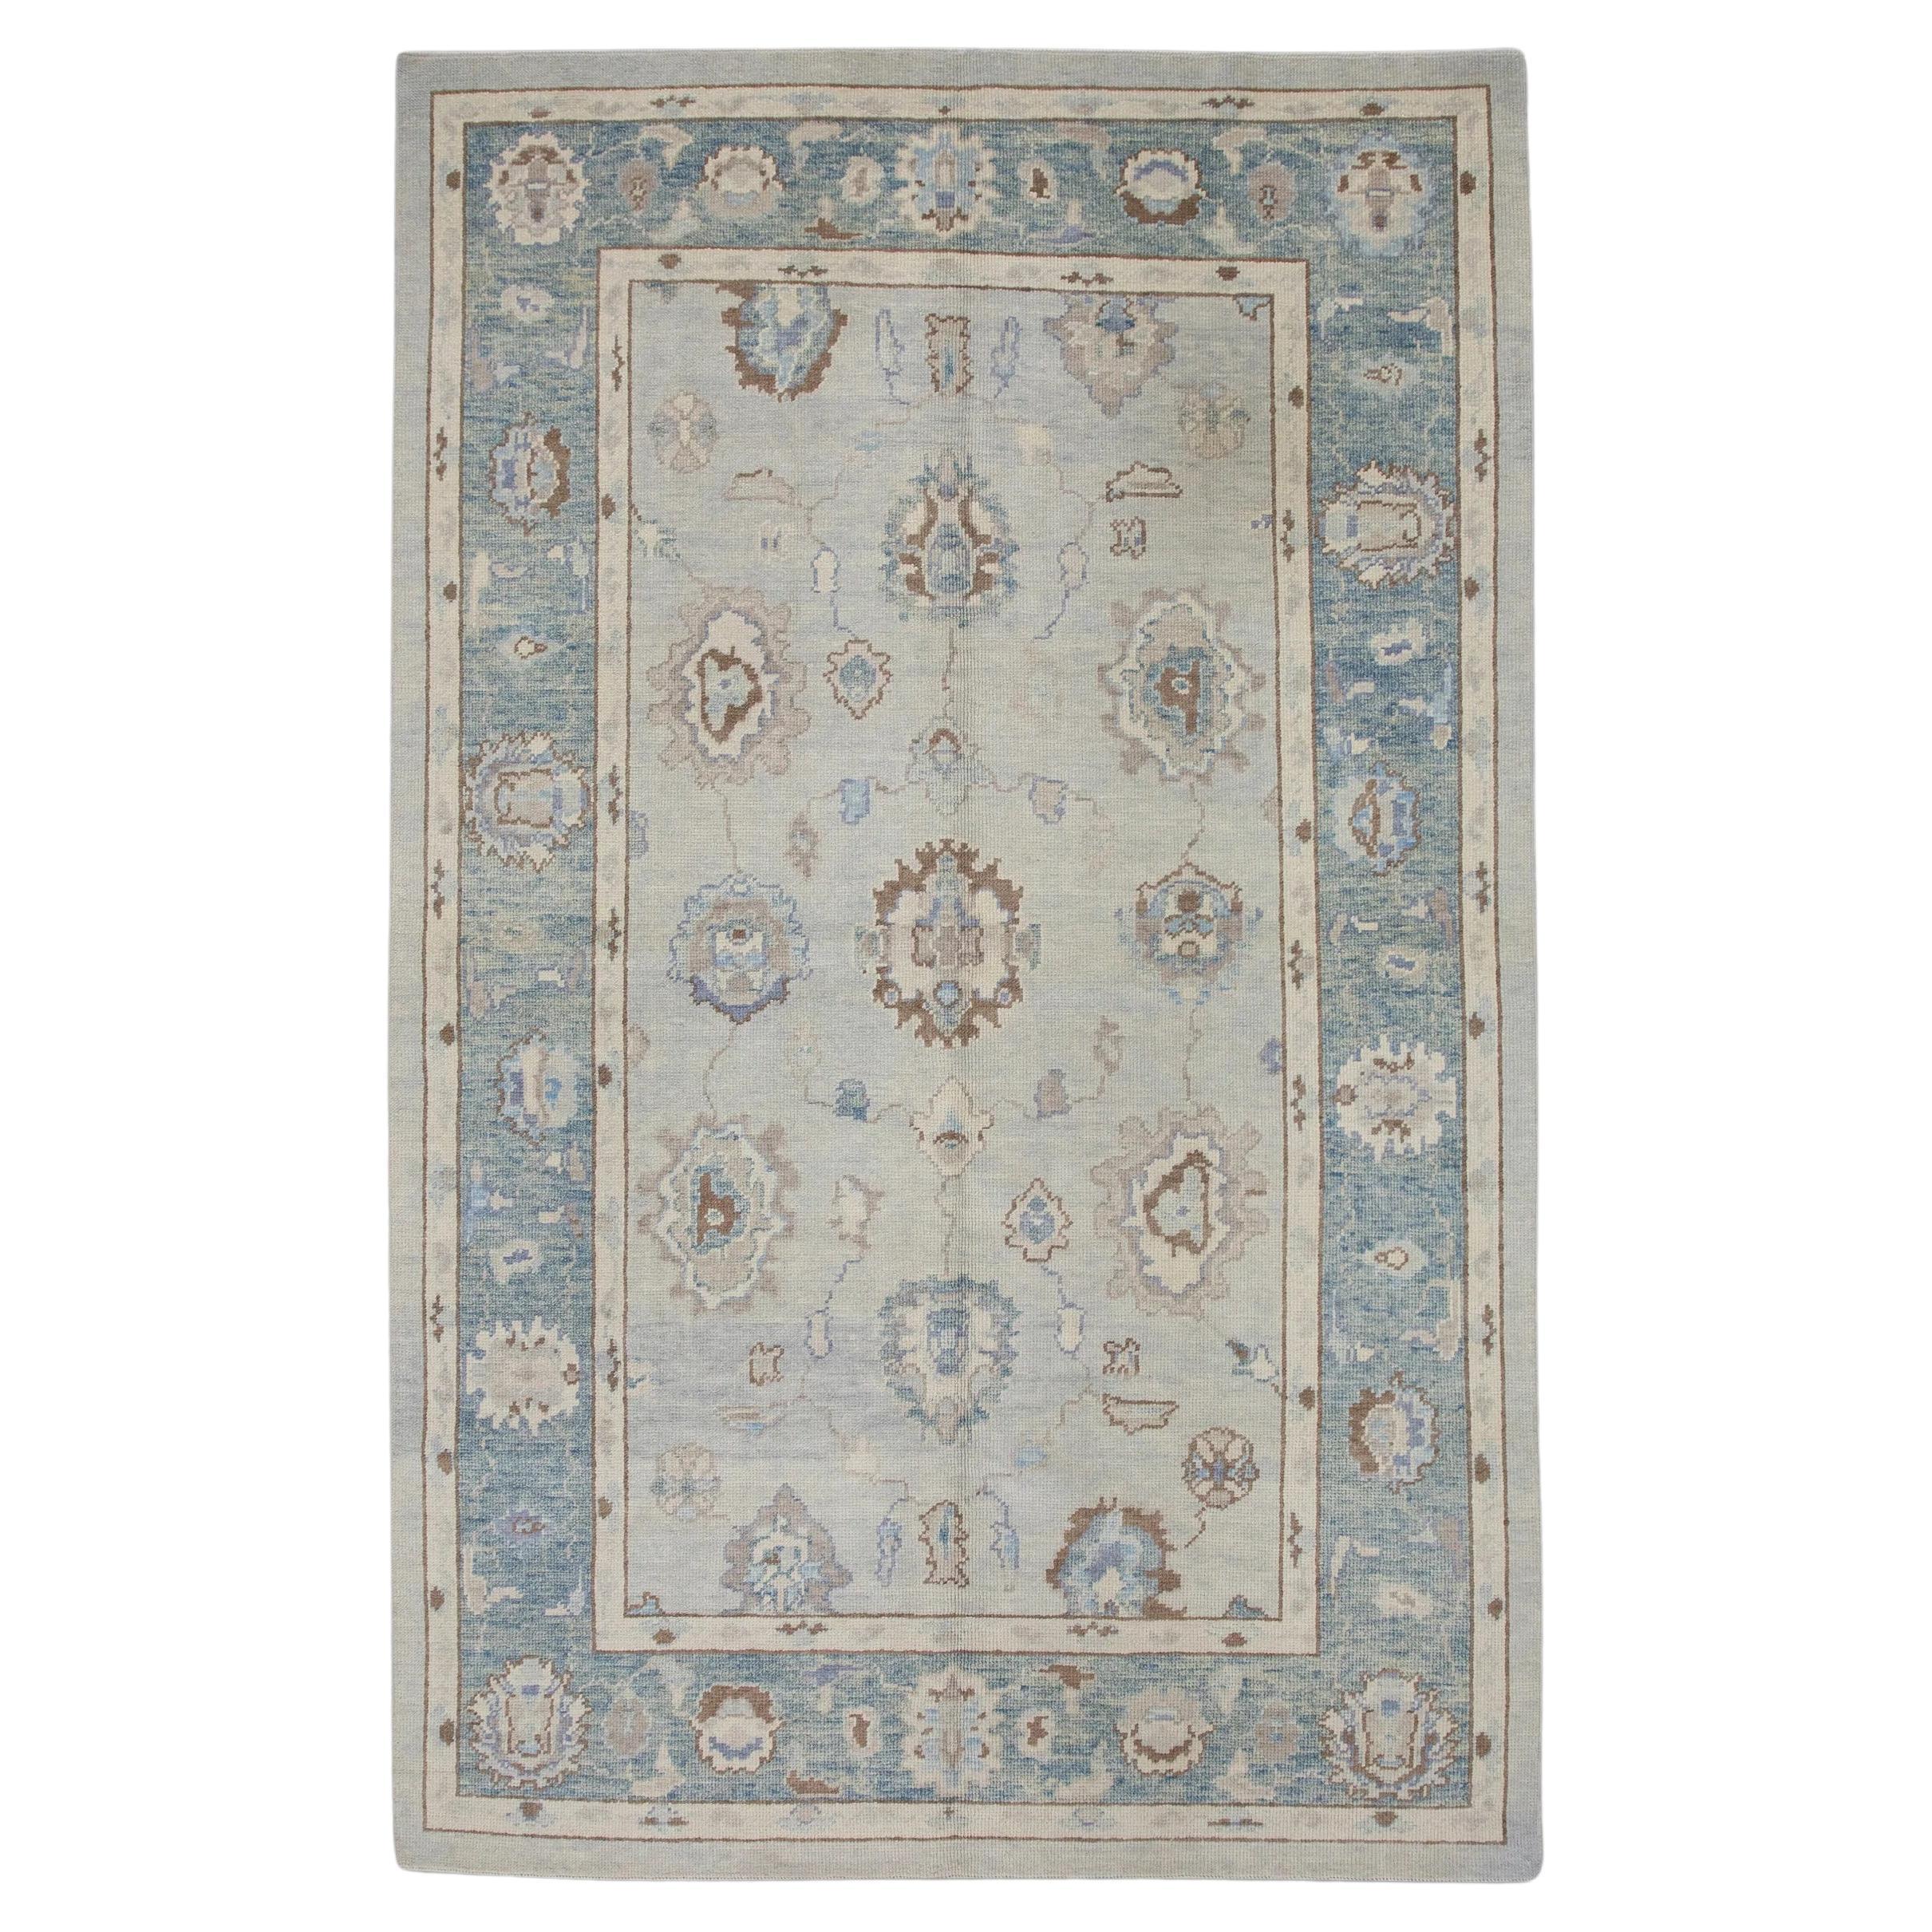 Blue and Brown Handwoven Wool Turkish Oushak Rug in Floral Pattern 6' x 9'1" For Sale